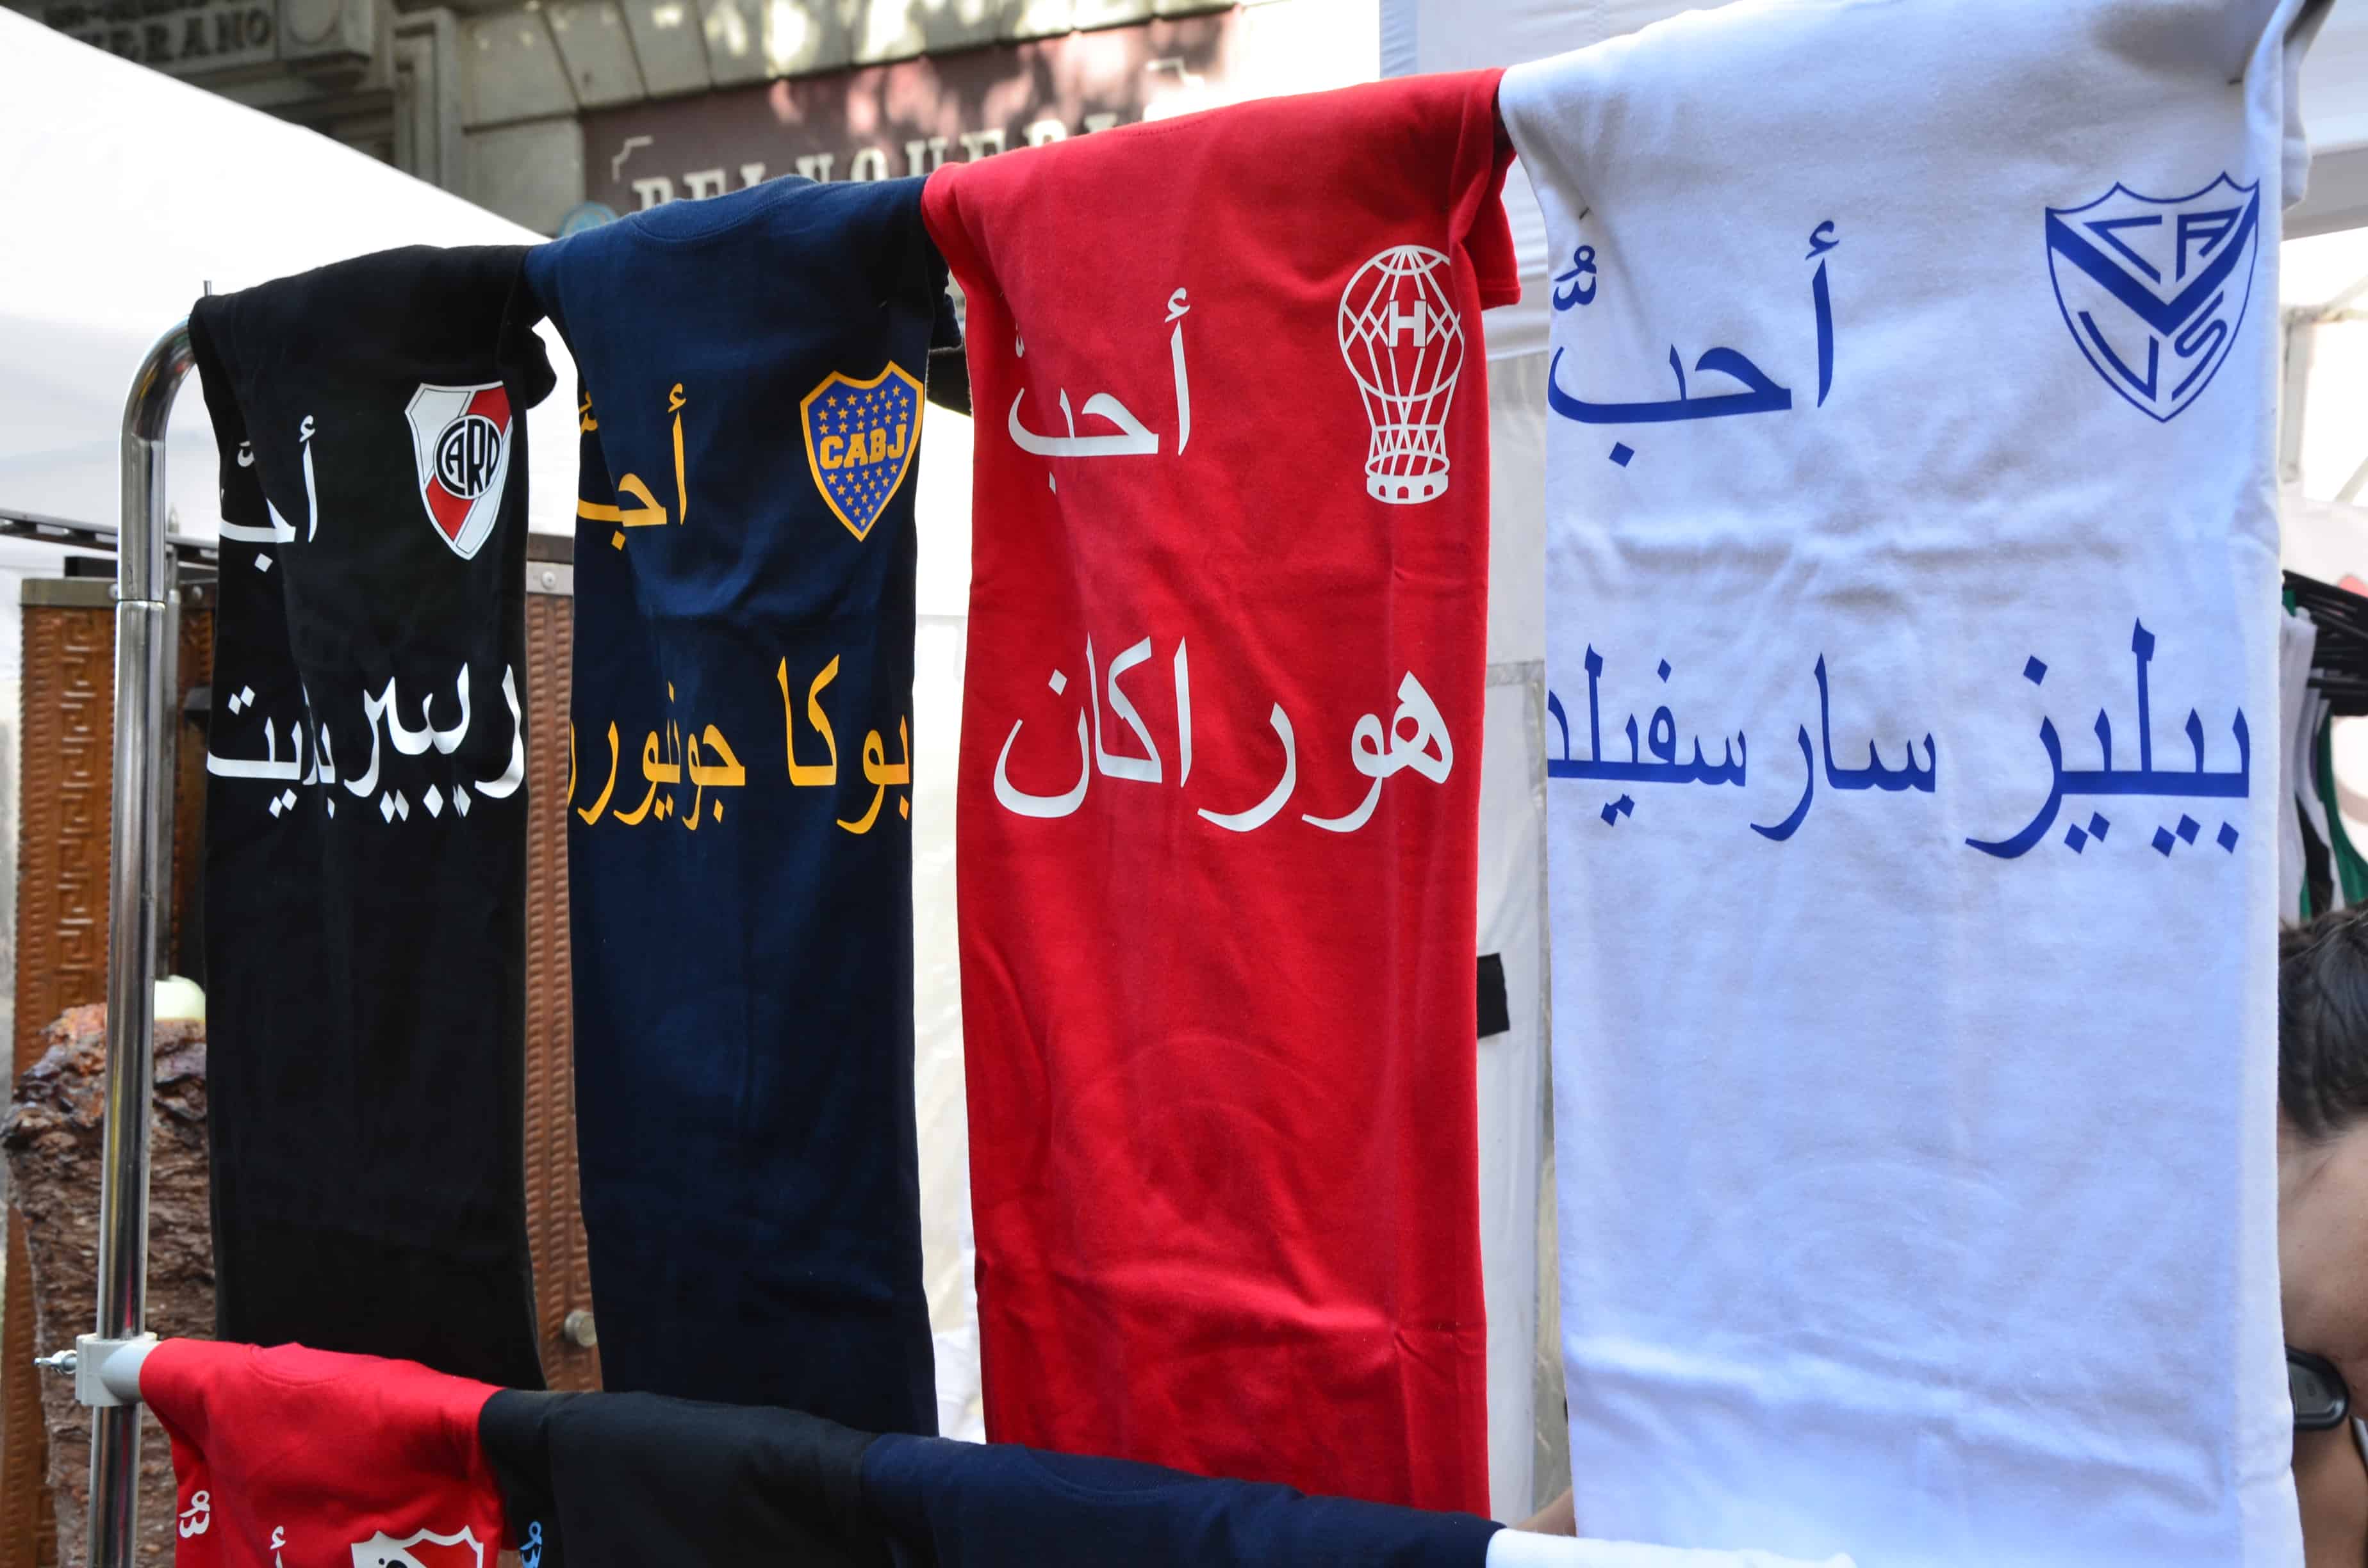 T-shirts for sale at the Arab cultural festival